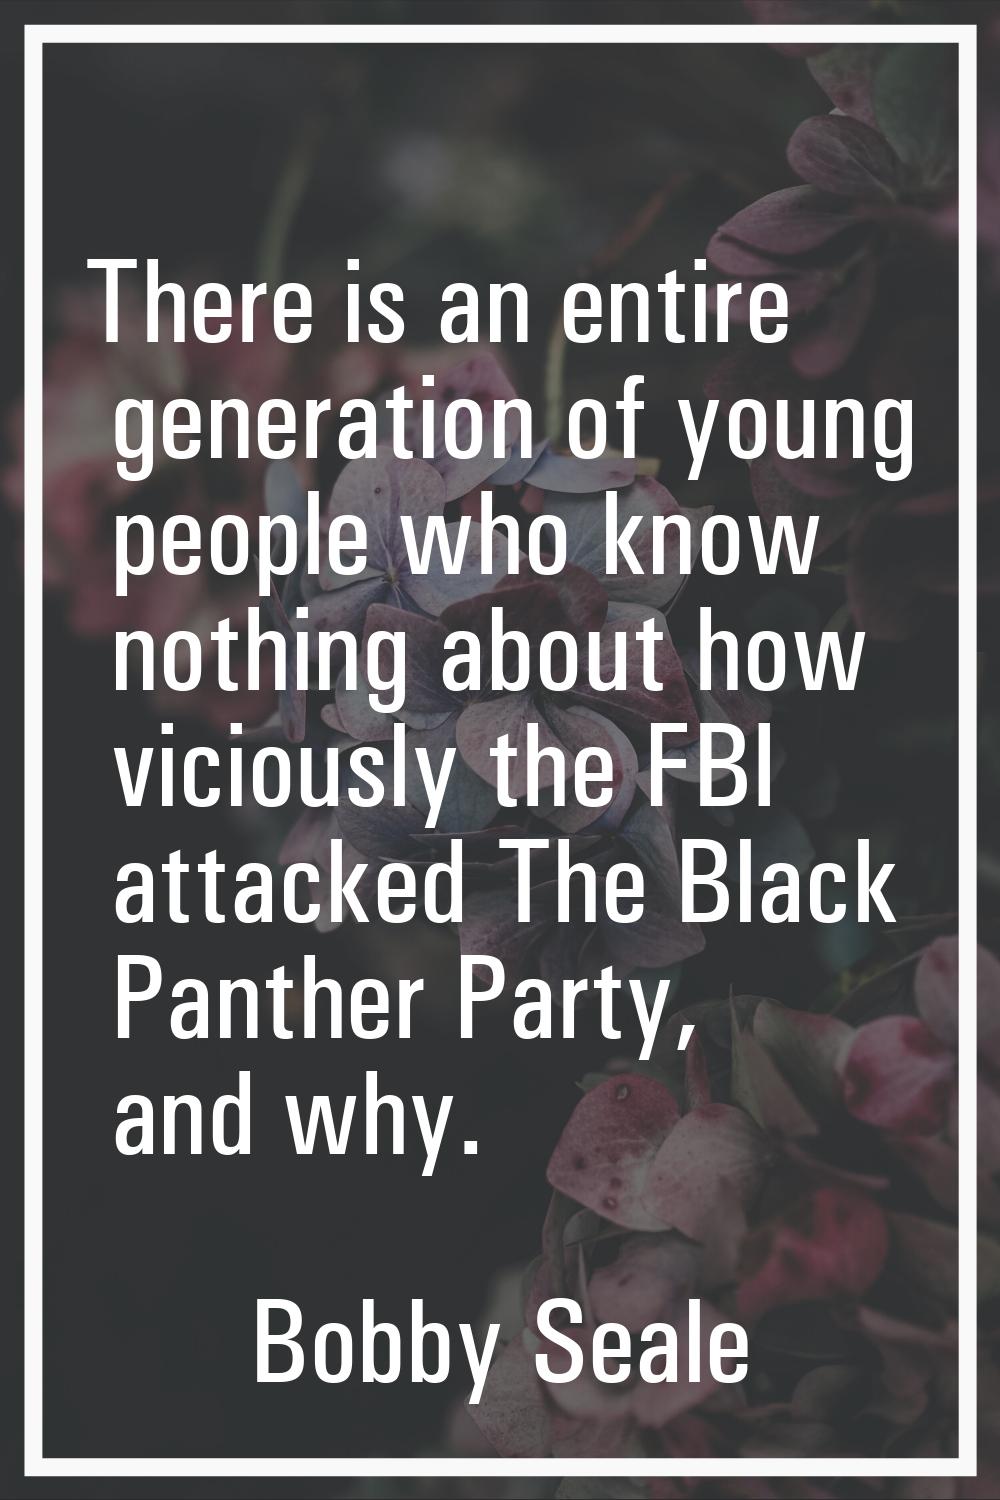 There is an entire generation of young people who know nothing about how viciously the FBI attacked